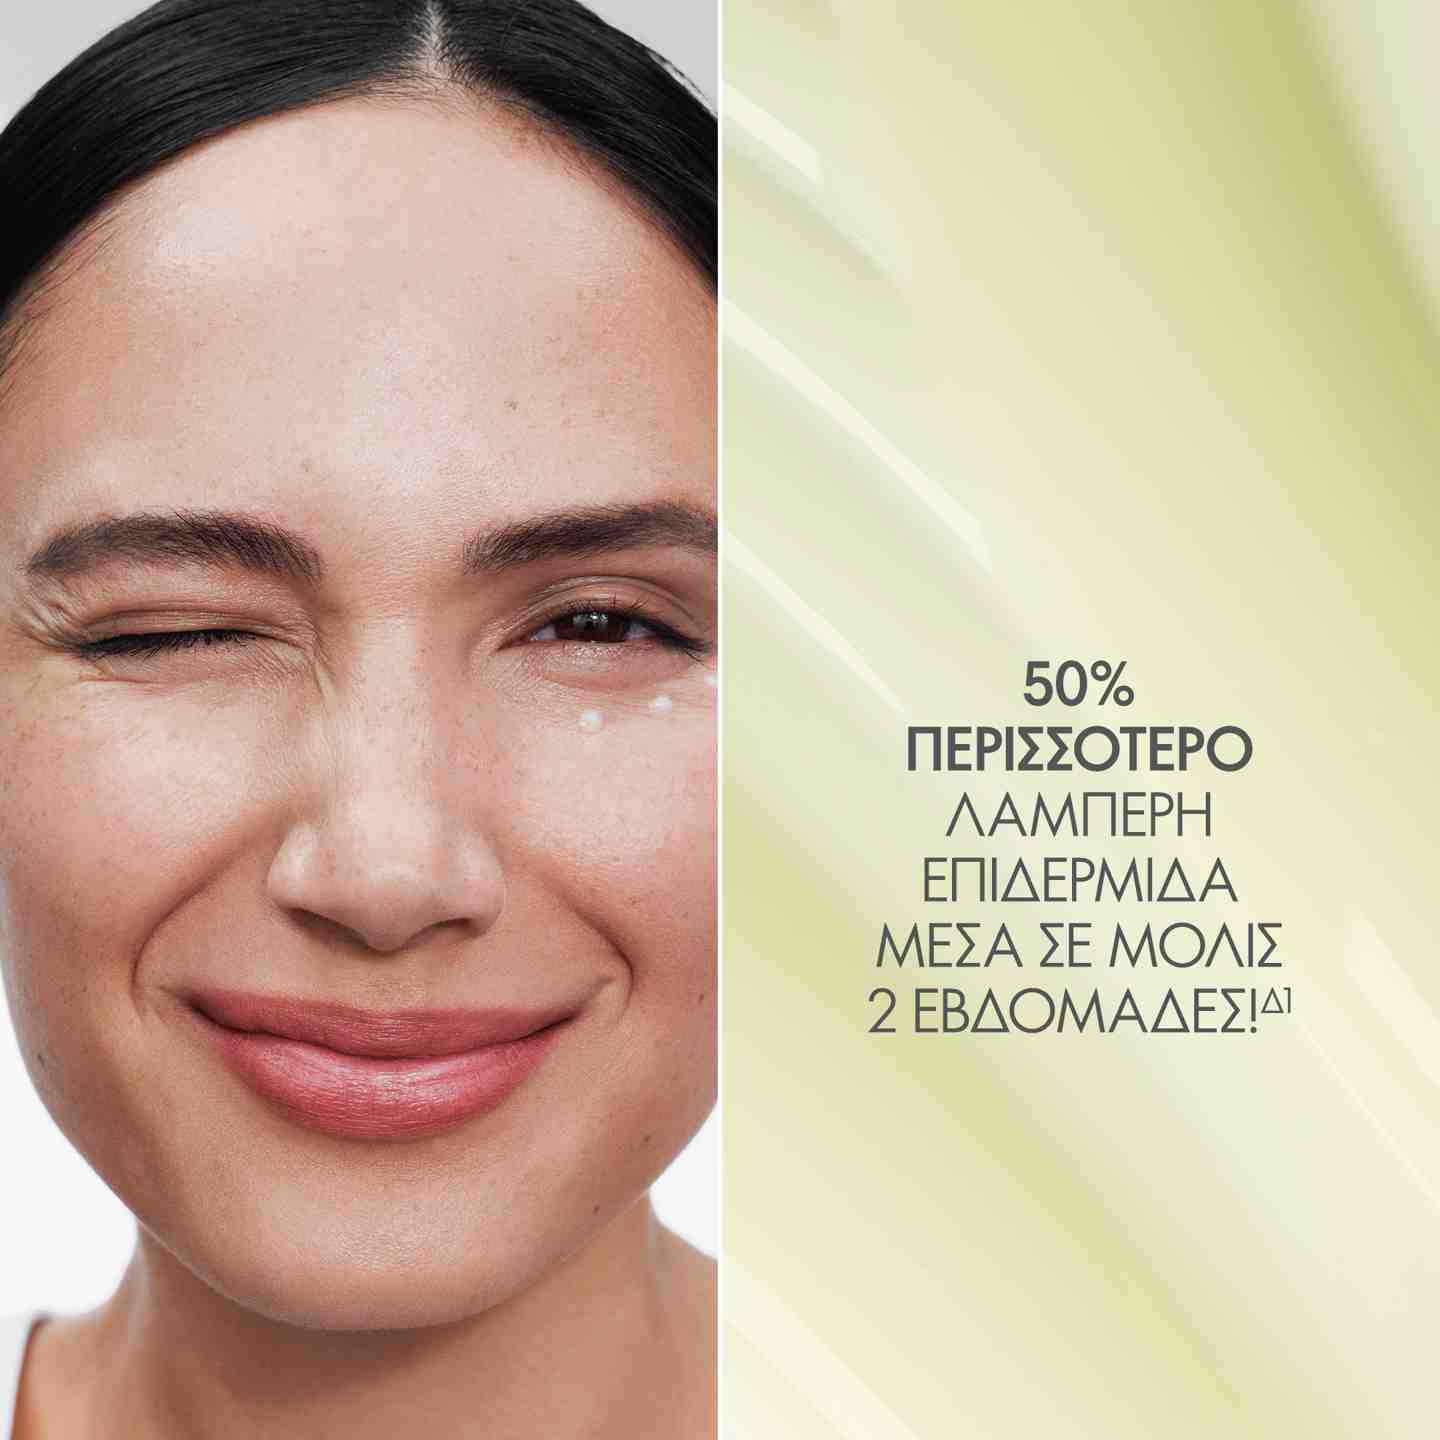 https://media-cdn.oriflame.com/productImage?externalMediaId=product-management-media%2fProducts%2f45595%2fGR%2f45595_2.png&id=17616243&version=1